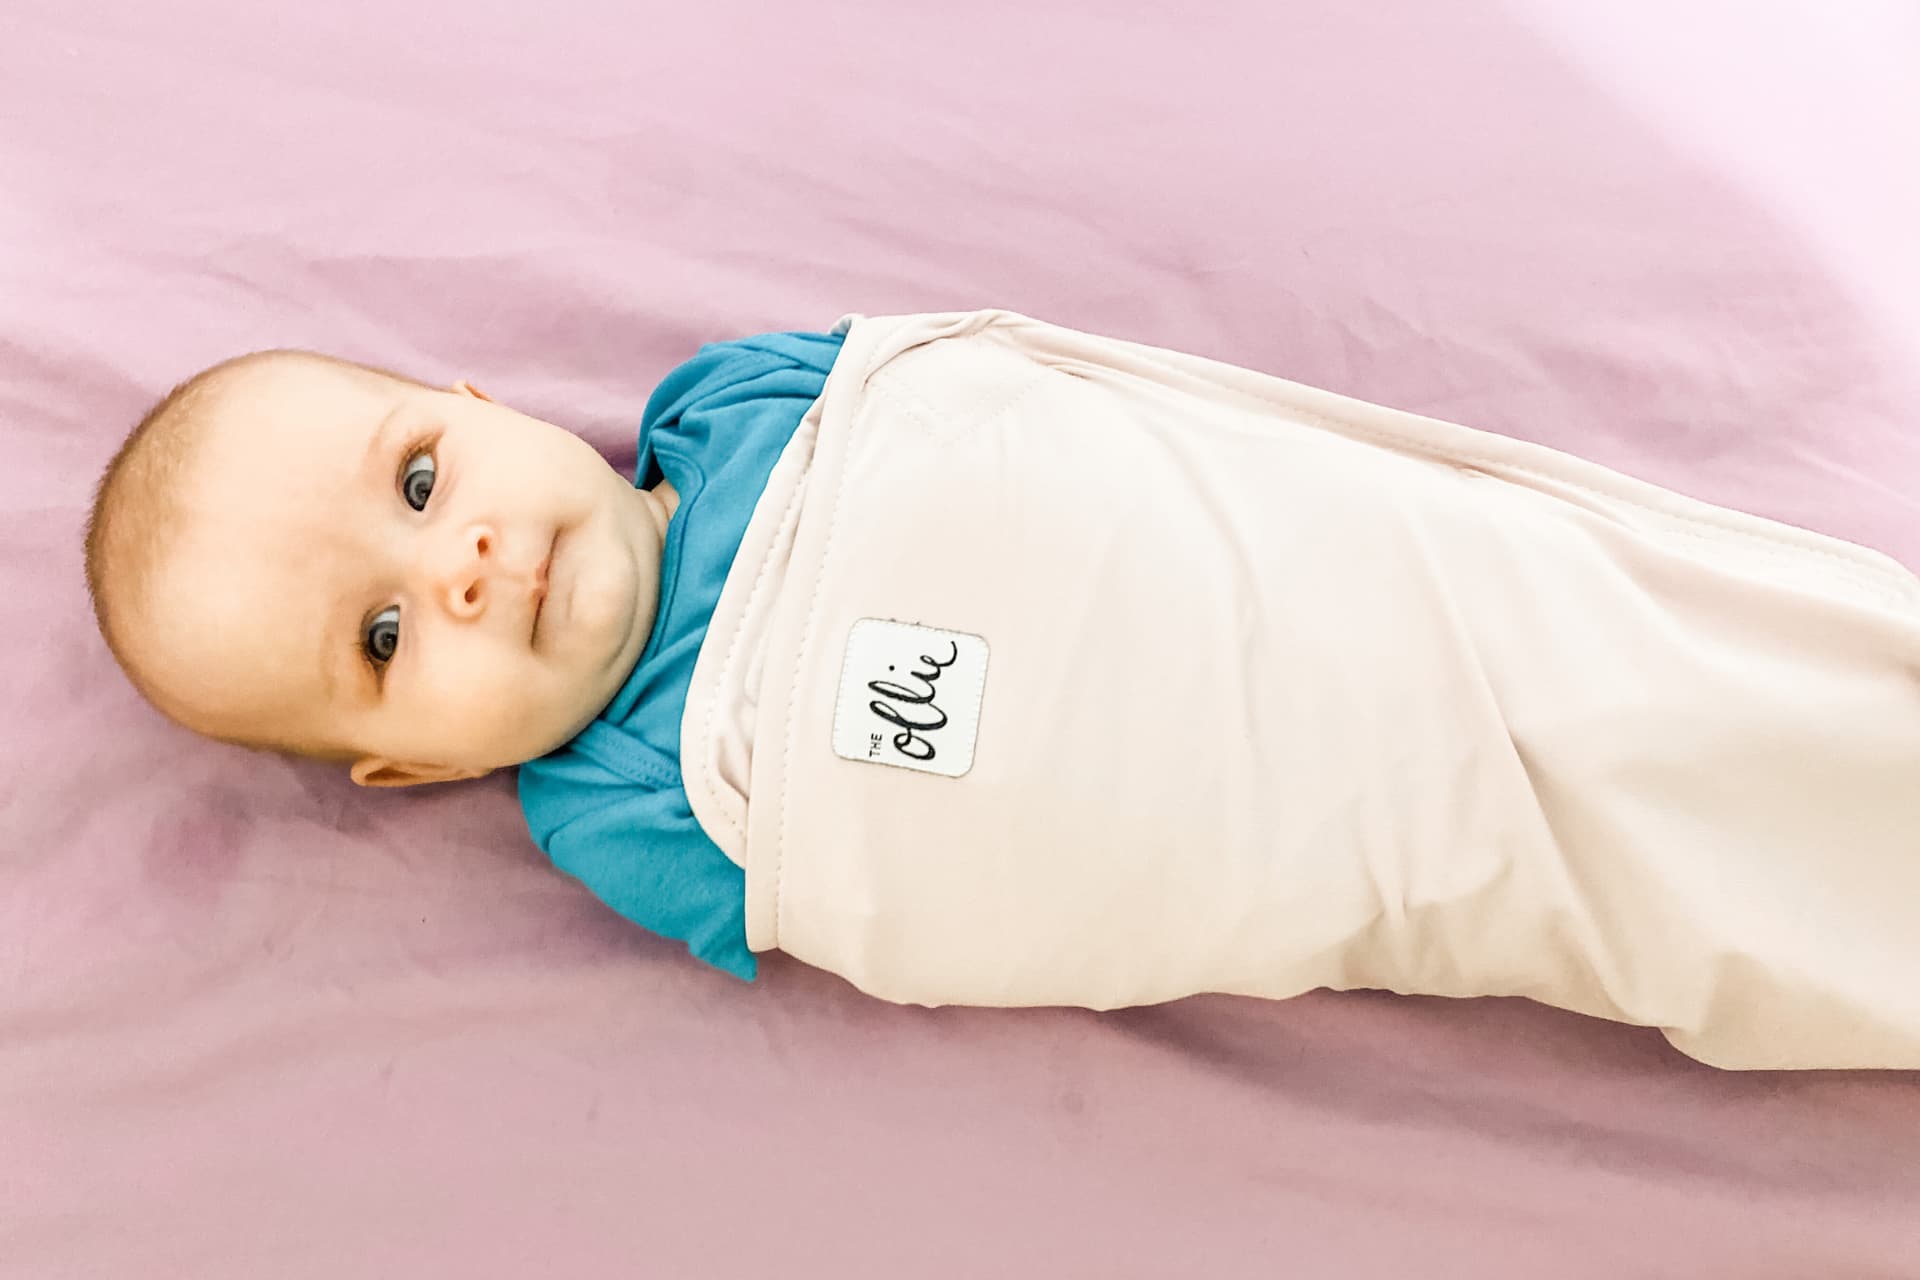 Your baby can do this too! Let us show you how easy it is to introduce